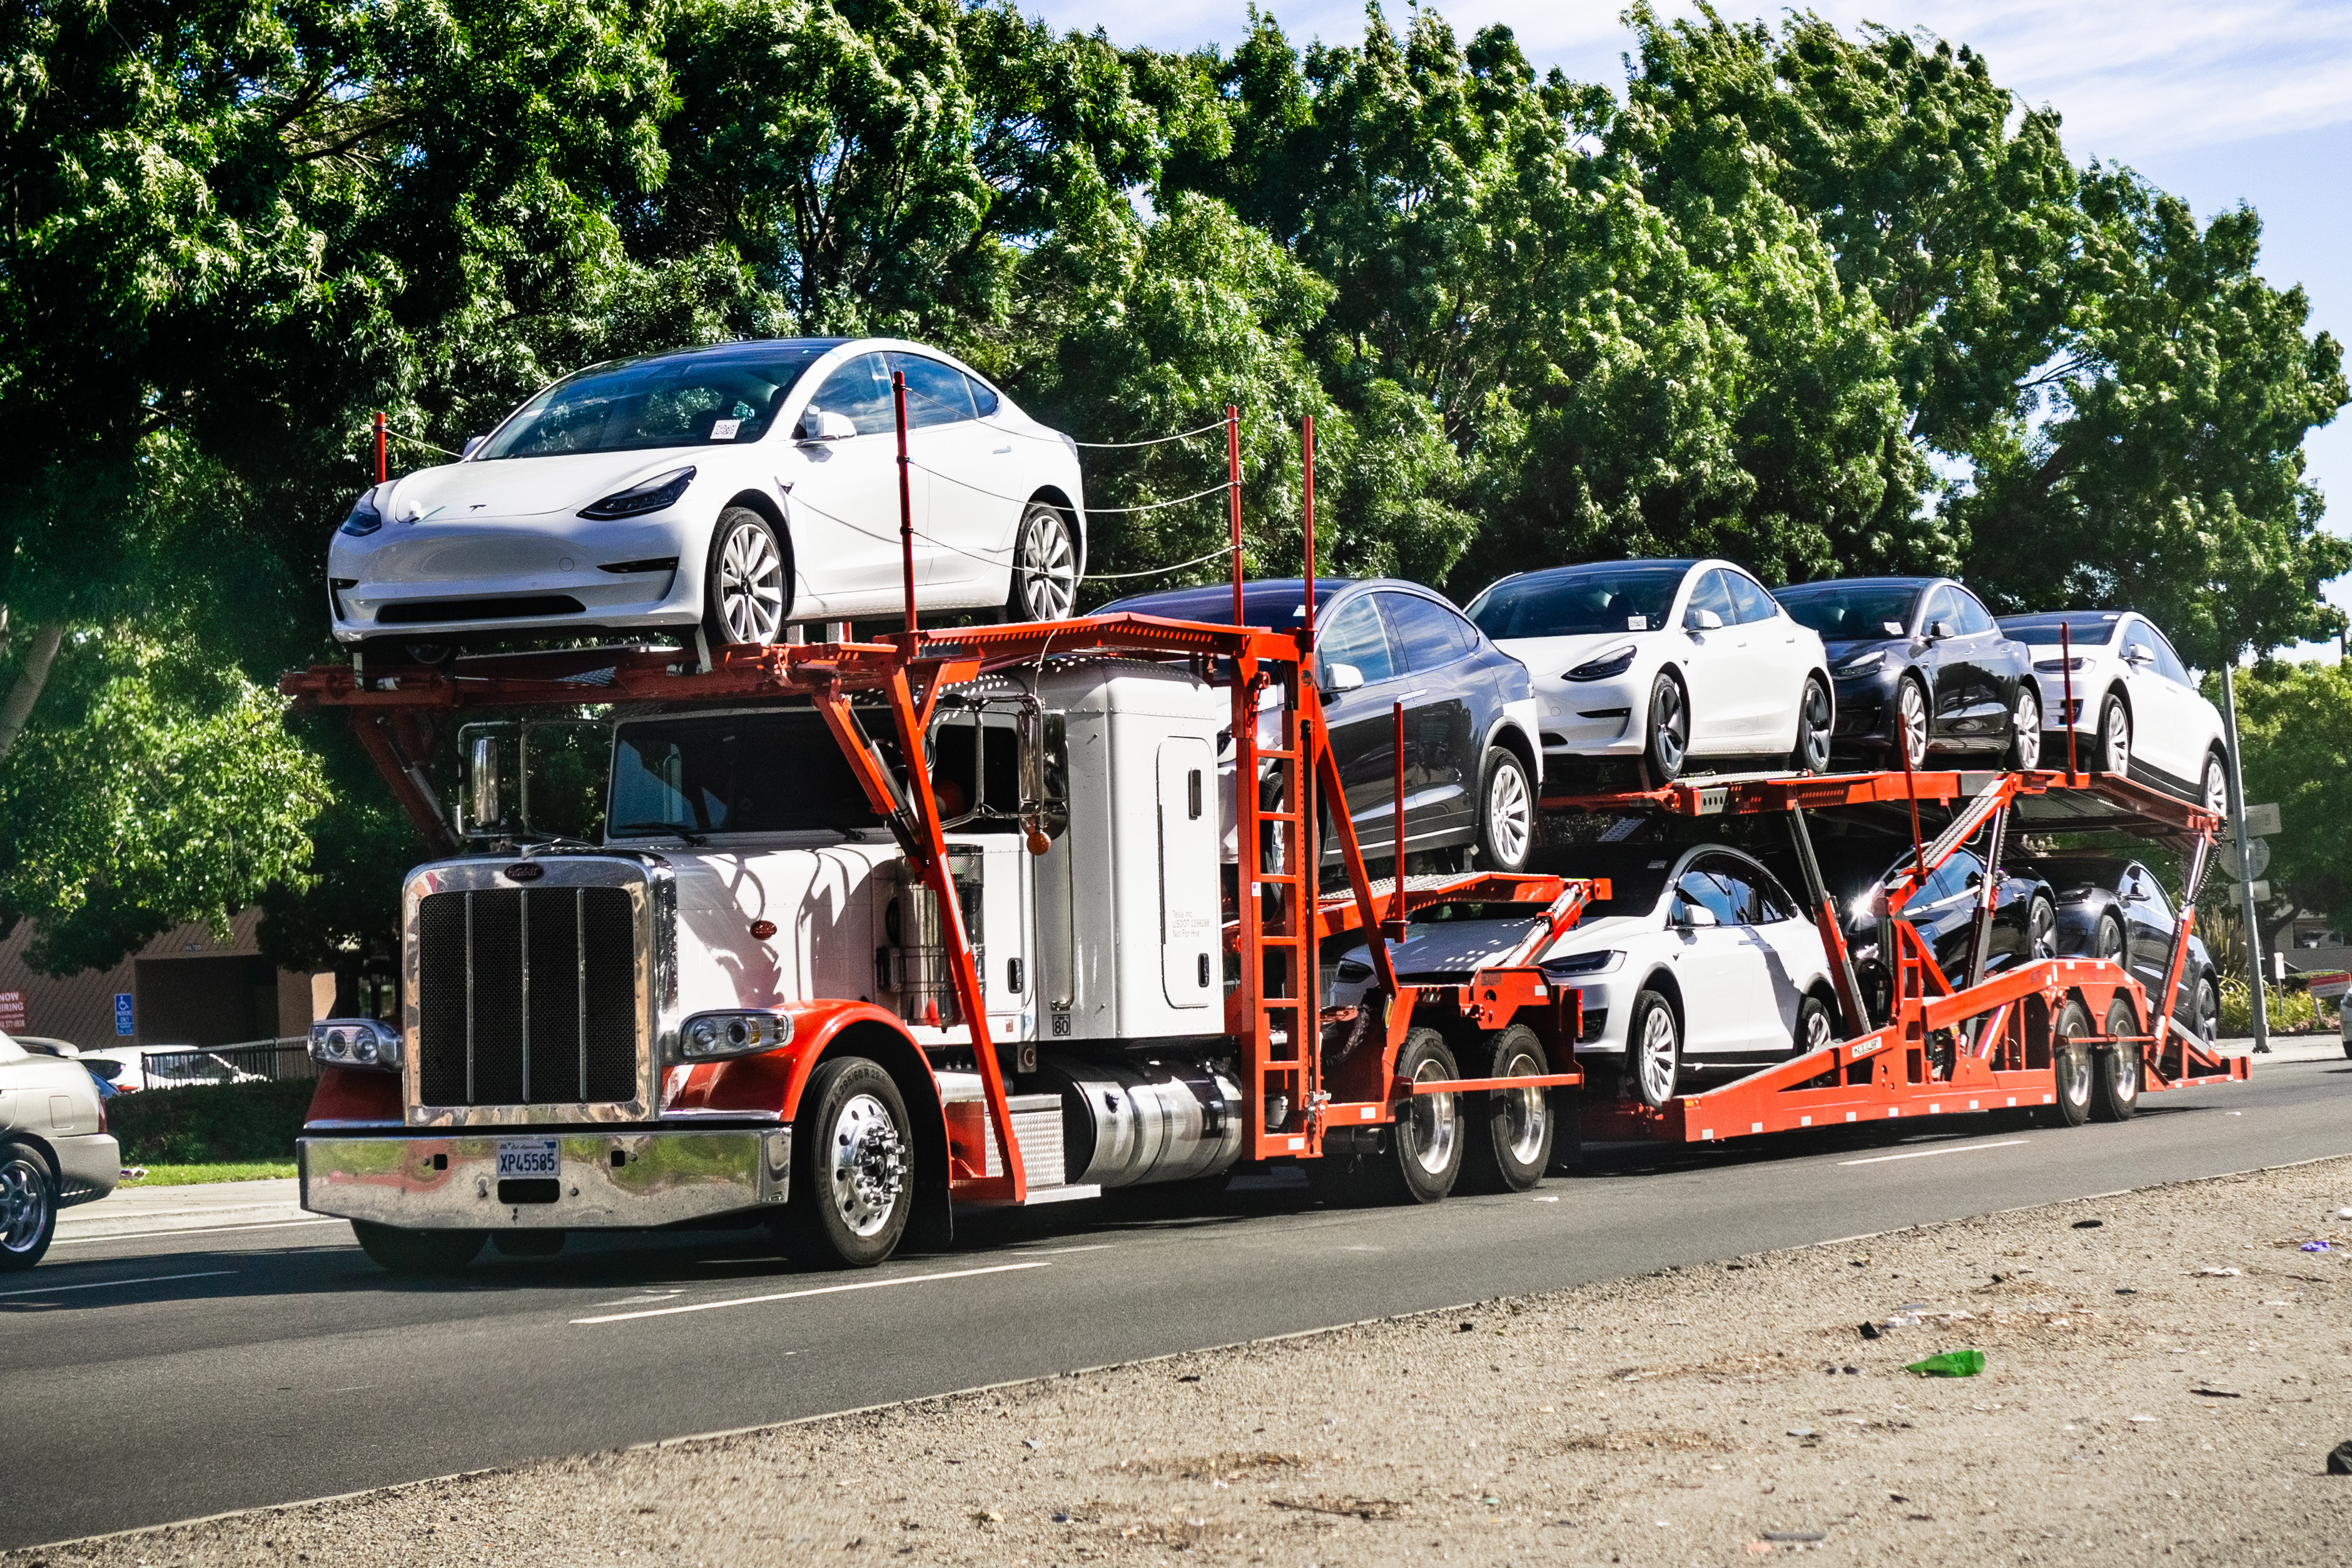 A truck transporting cars | Source: Shutterstock